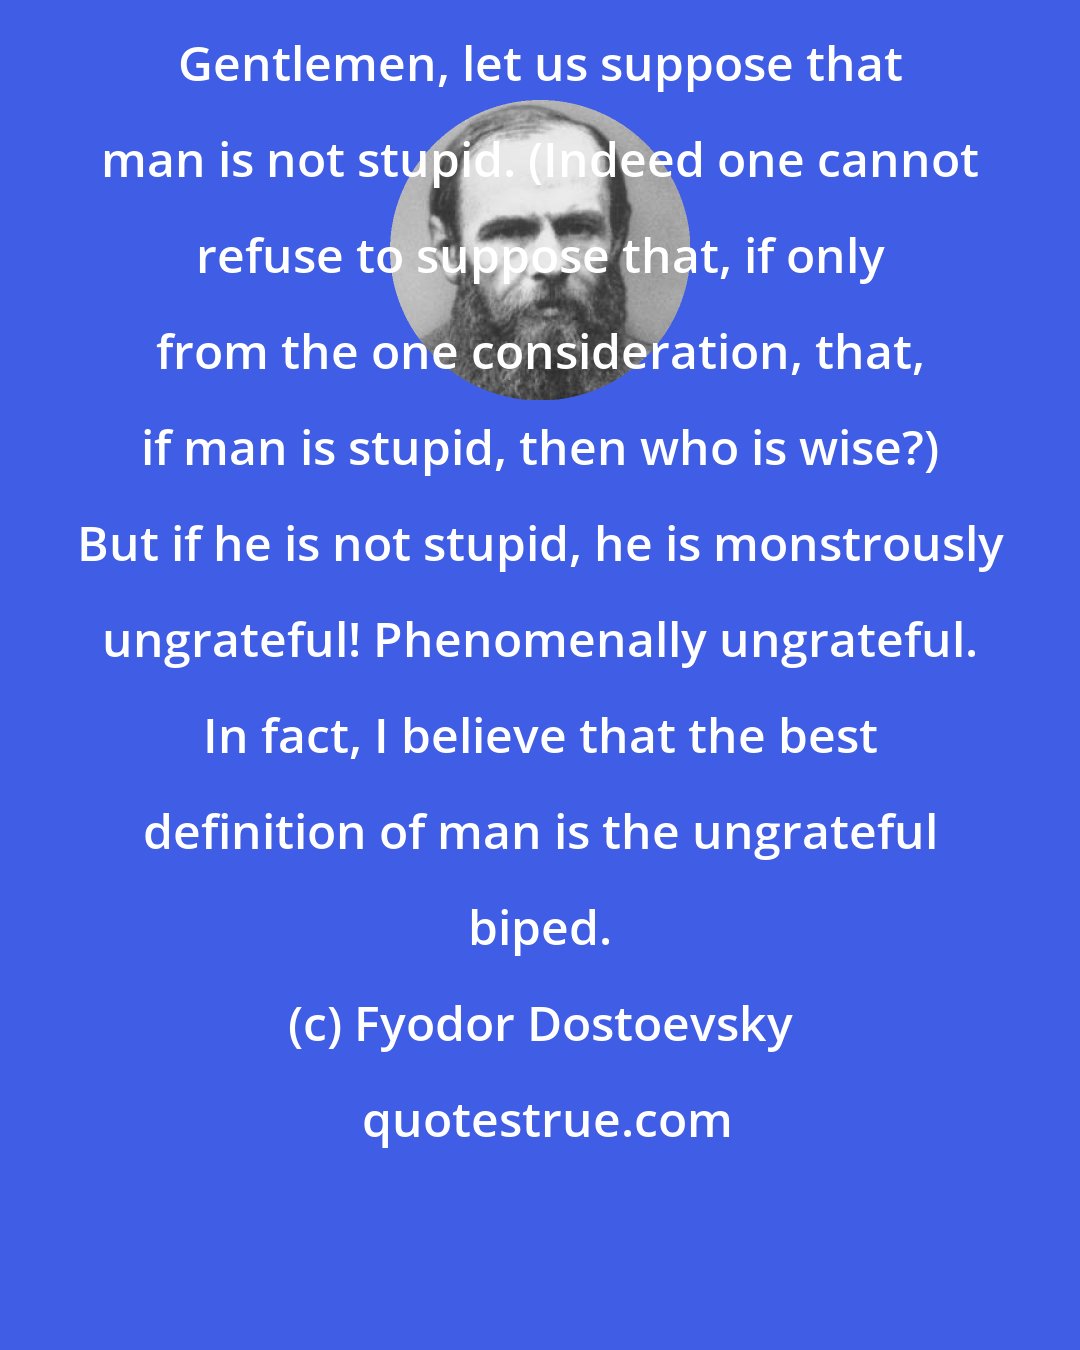 Fyodor Dostoevsky: Gentlemen, let us suppose that man is not stupid. (Indeed one cannot refuse to suppose that, if only from the one consideration, that, if man is stupid, then who is wise?) But if he is not stupid, he is monstrously ungrateful! Phenomenally ungrateful. In fact, I believe that the best definition of man is the ungrateful biped.